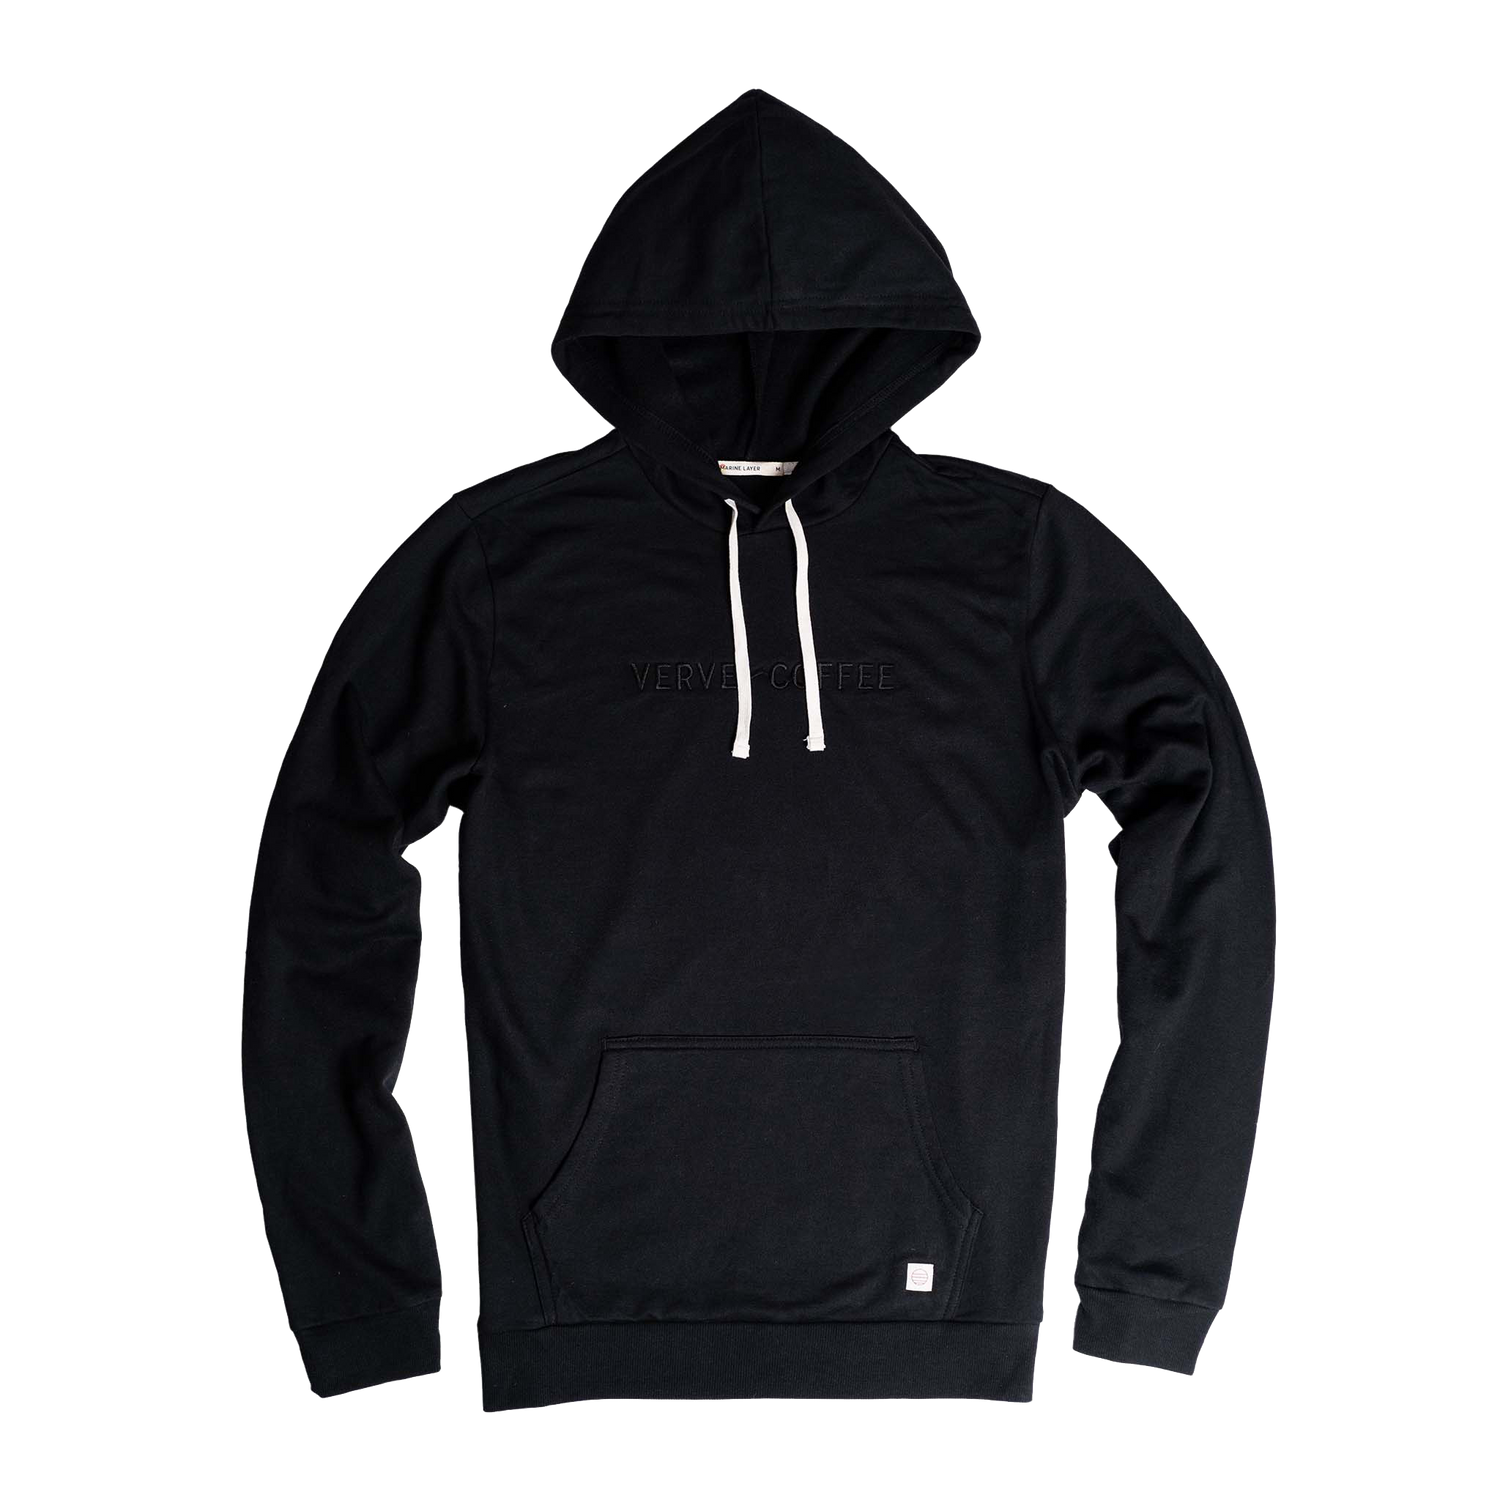 Verve Classic Noir Unisex Pullover Hoodie. All Black with "verve coffee" embroidery 